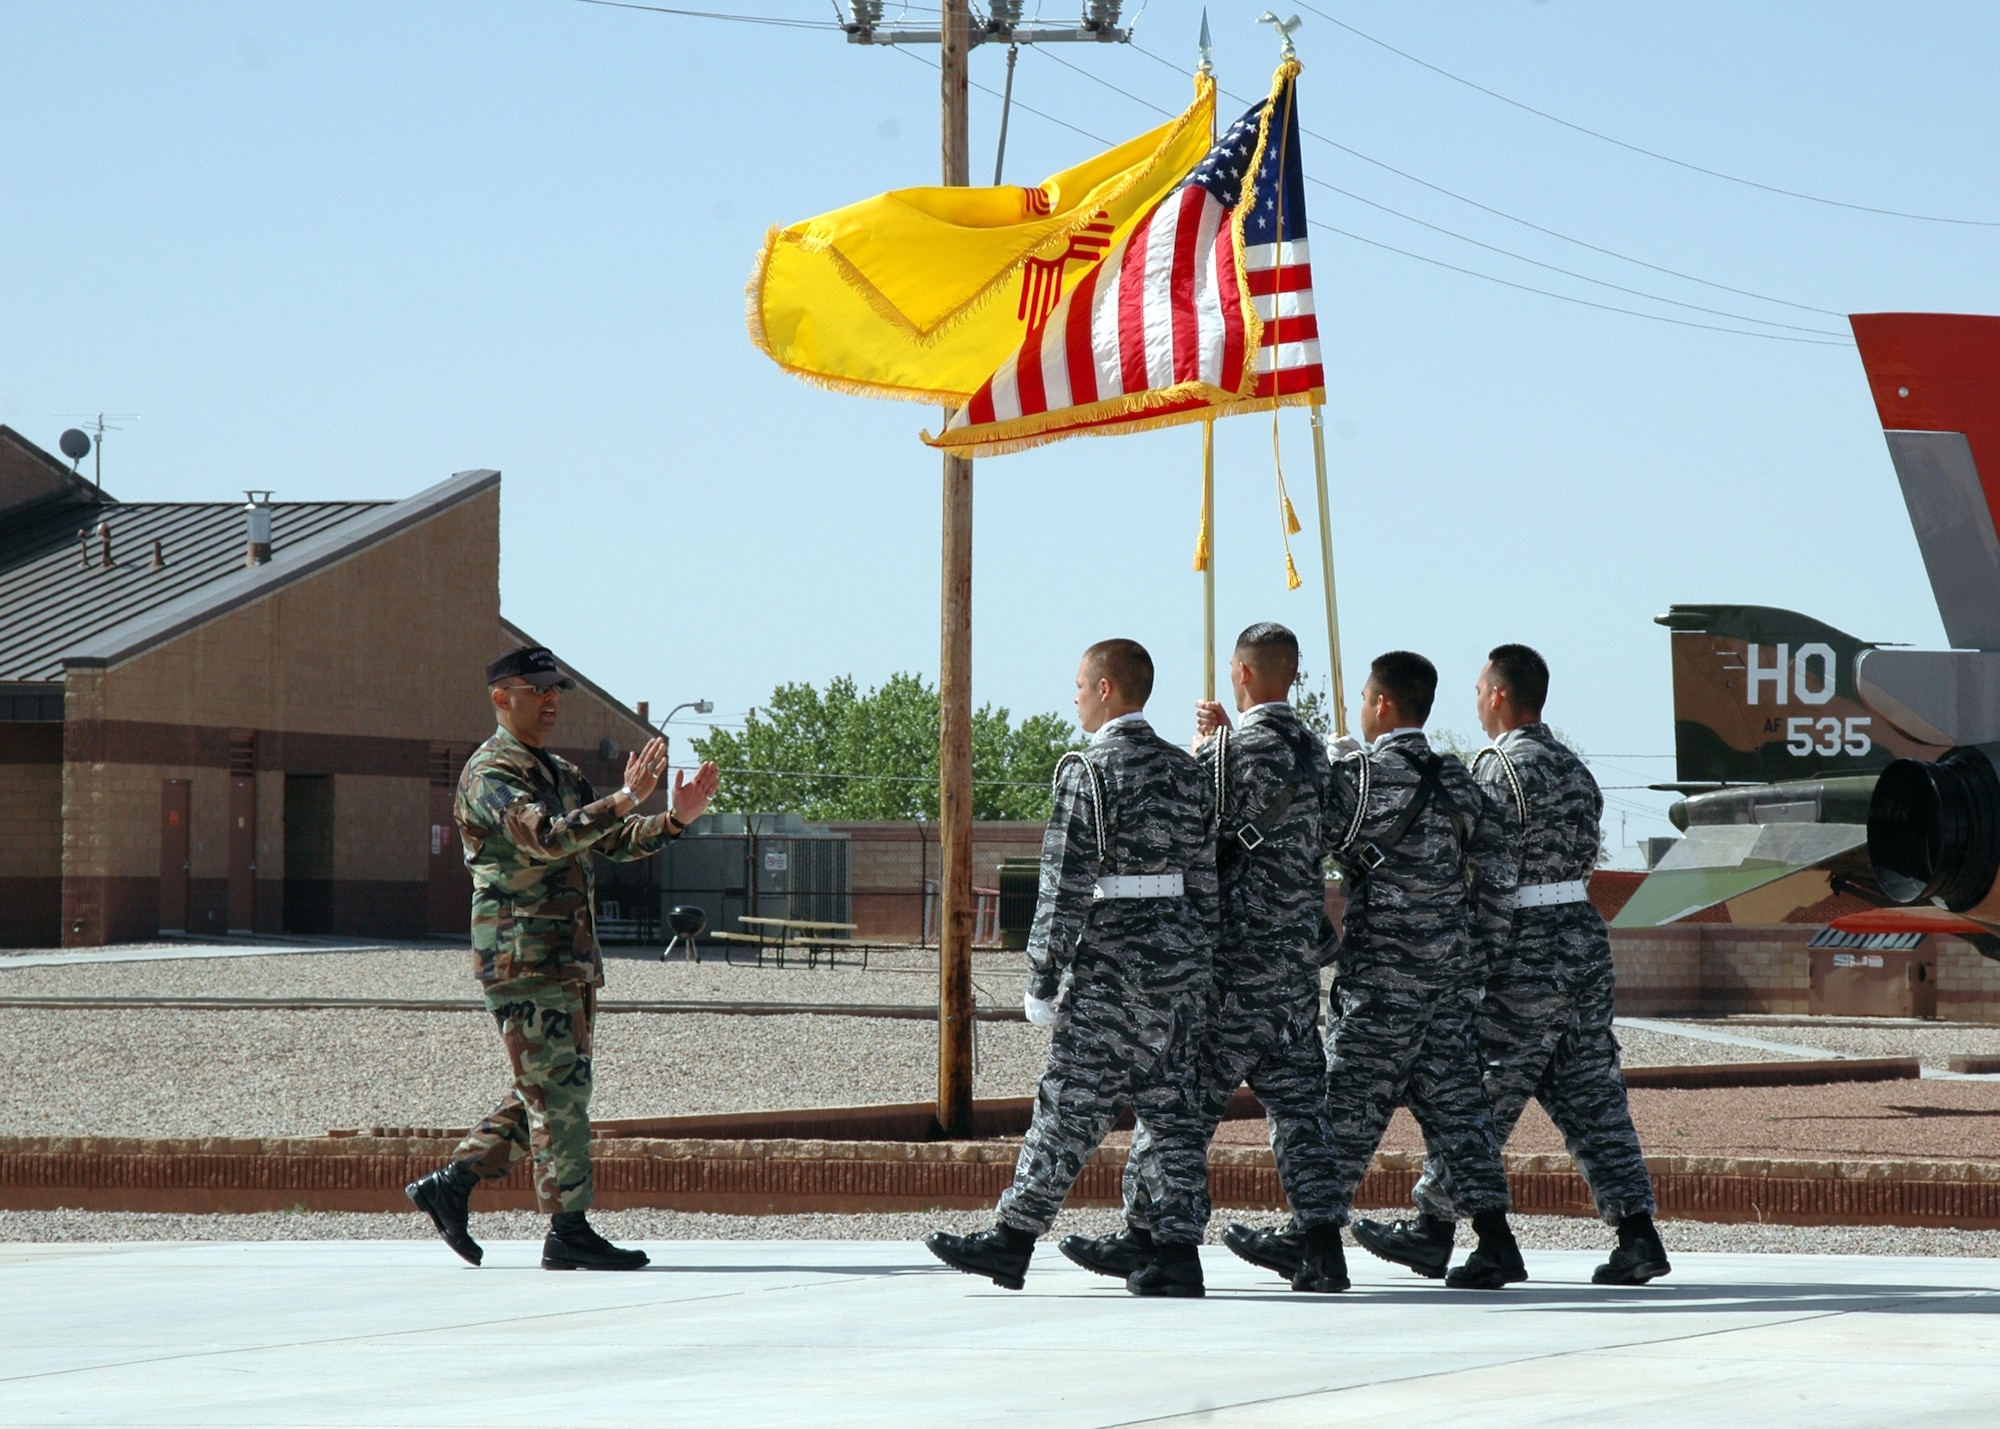 Master Sgt. Paul Sanchez, Steel Talons Honor Guard NCOIC, instructs students from Camp Sierra Blanca on Air Force Color Guard and other drill movements March 28. (U.S. Air Force photo by Airman Jamal Sutter)